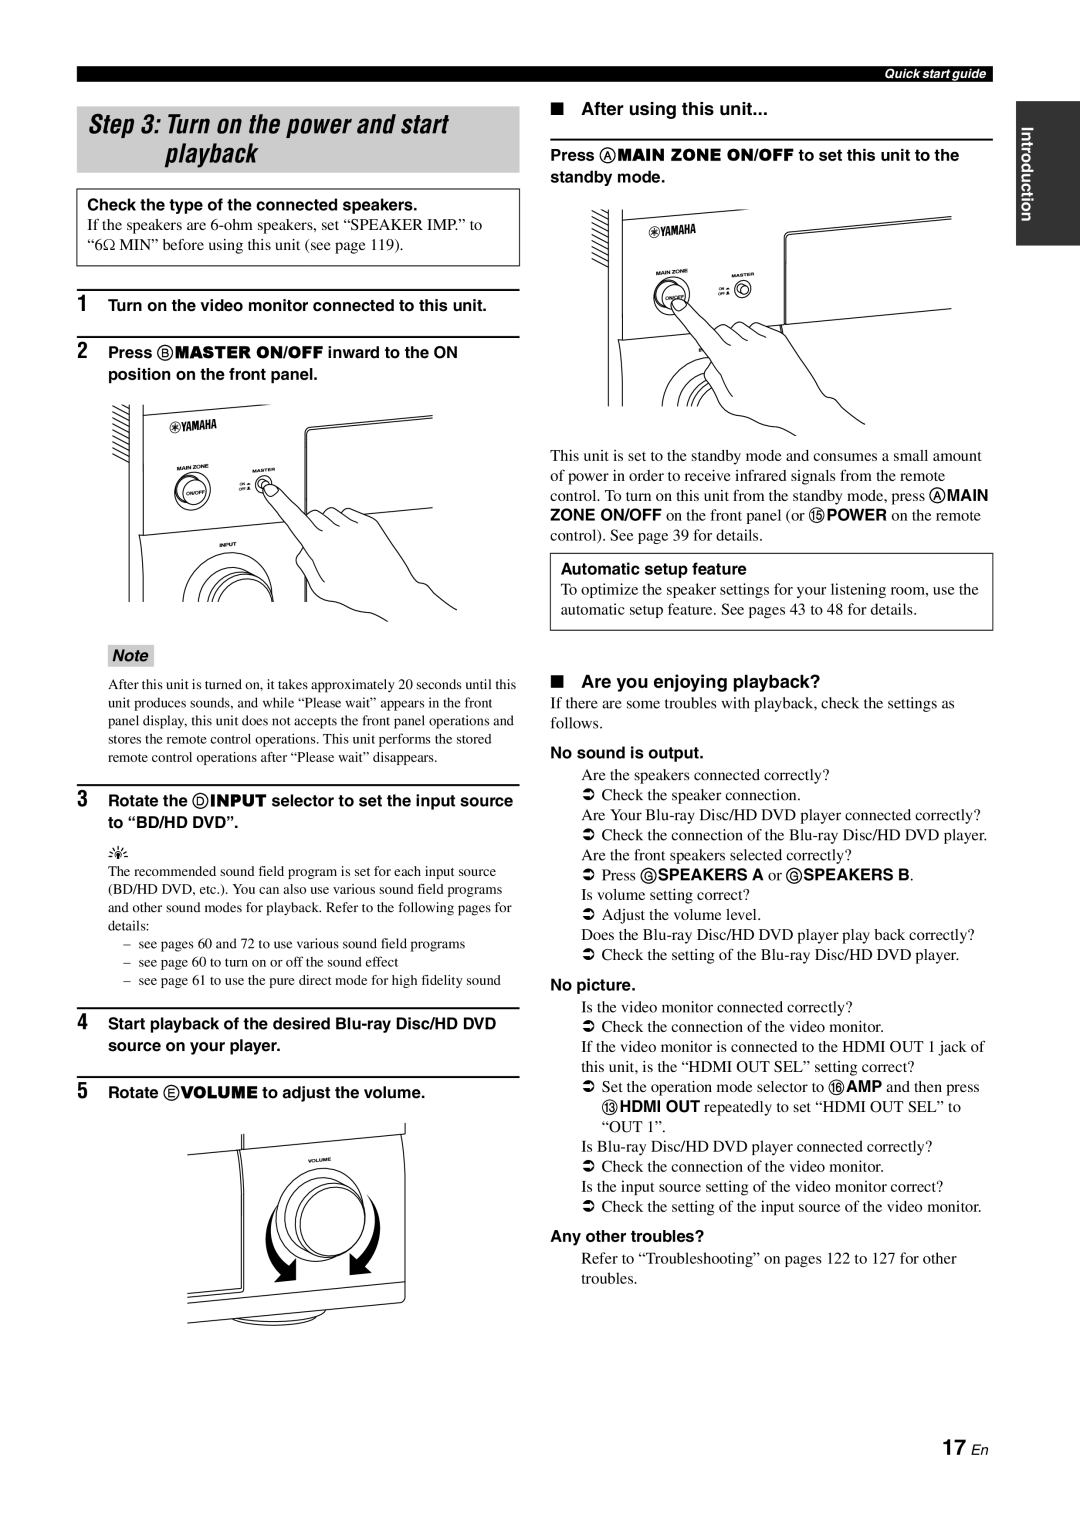 Yamaha DSP-Z11 owner manual 17 En, After using this unit, Are you enjoying playback?, Turn on the power and start playback 